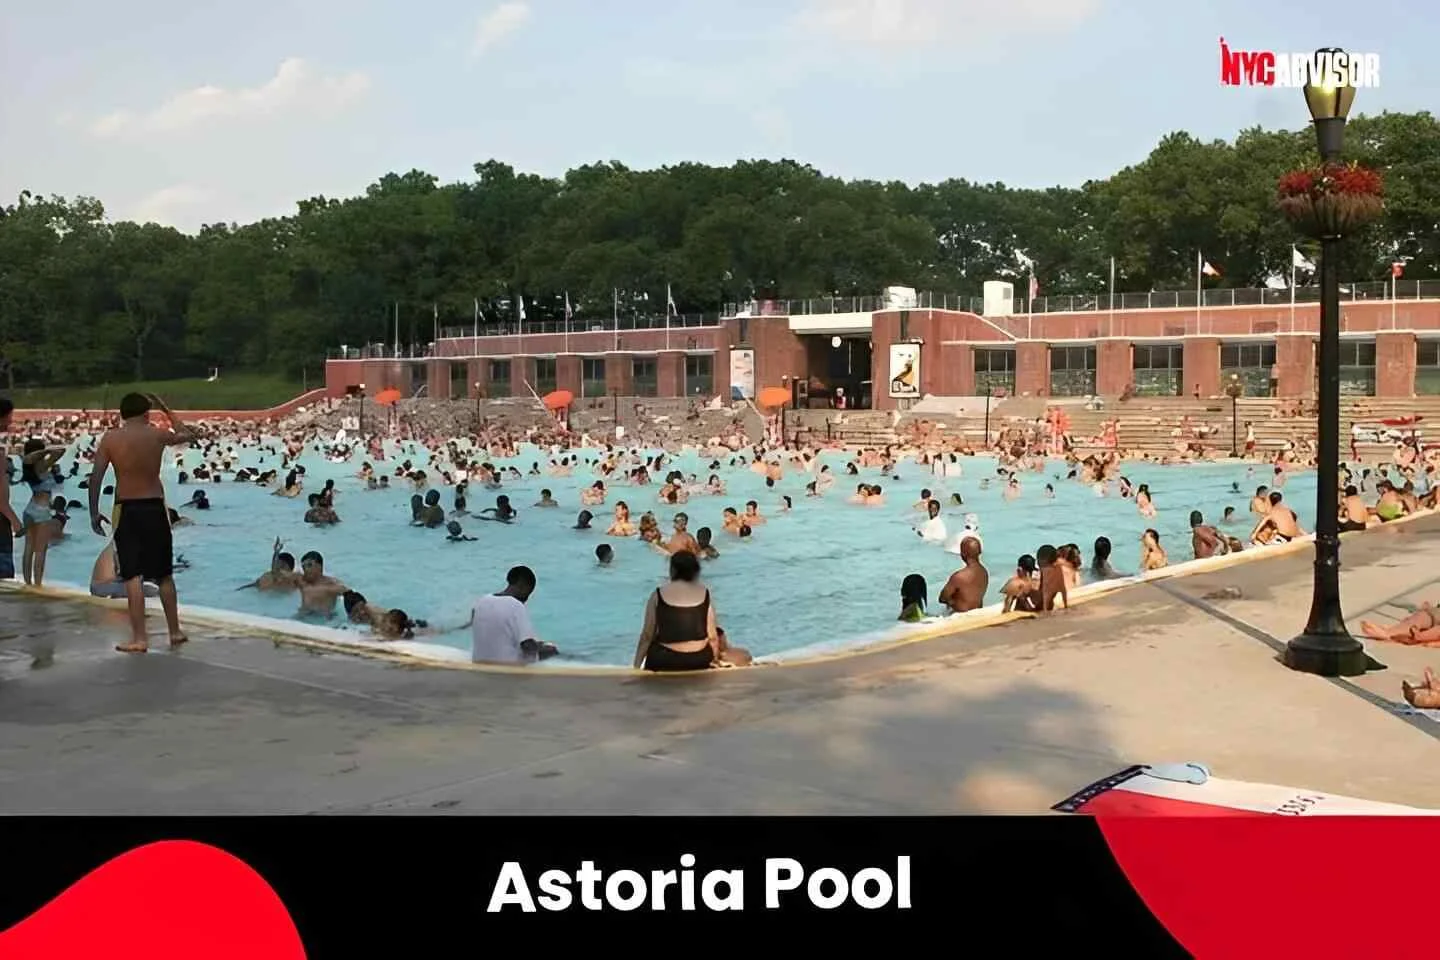 Astoria Pool in NYC